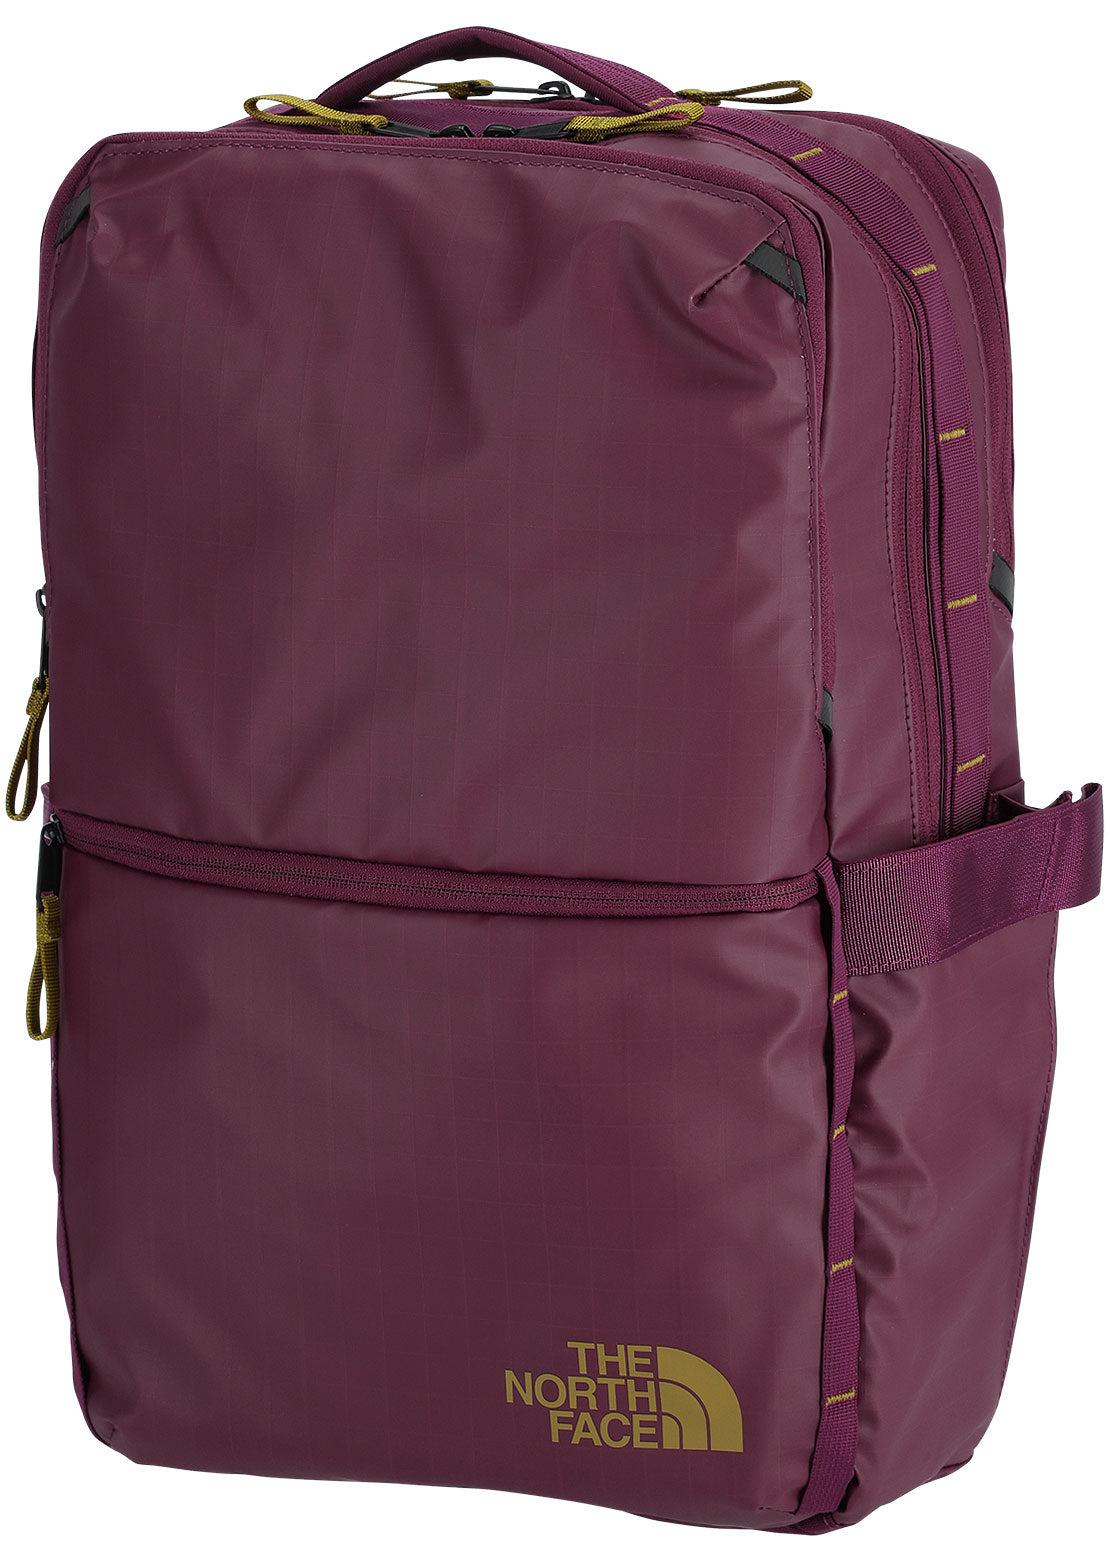 The North Face Base Camp Voyager Daypack - S Boysenberry/Sulphur Moss